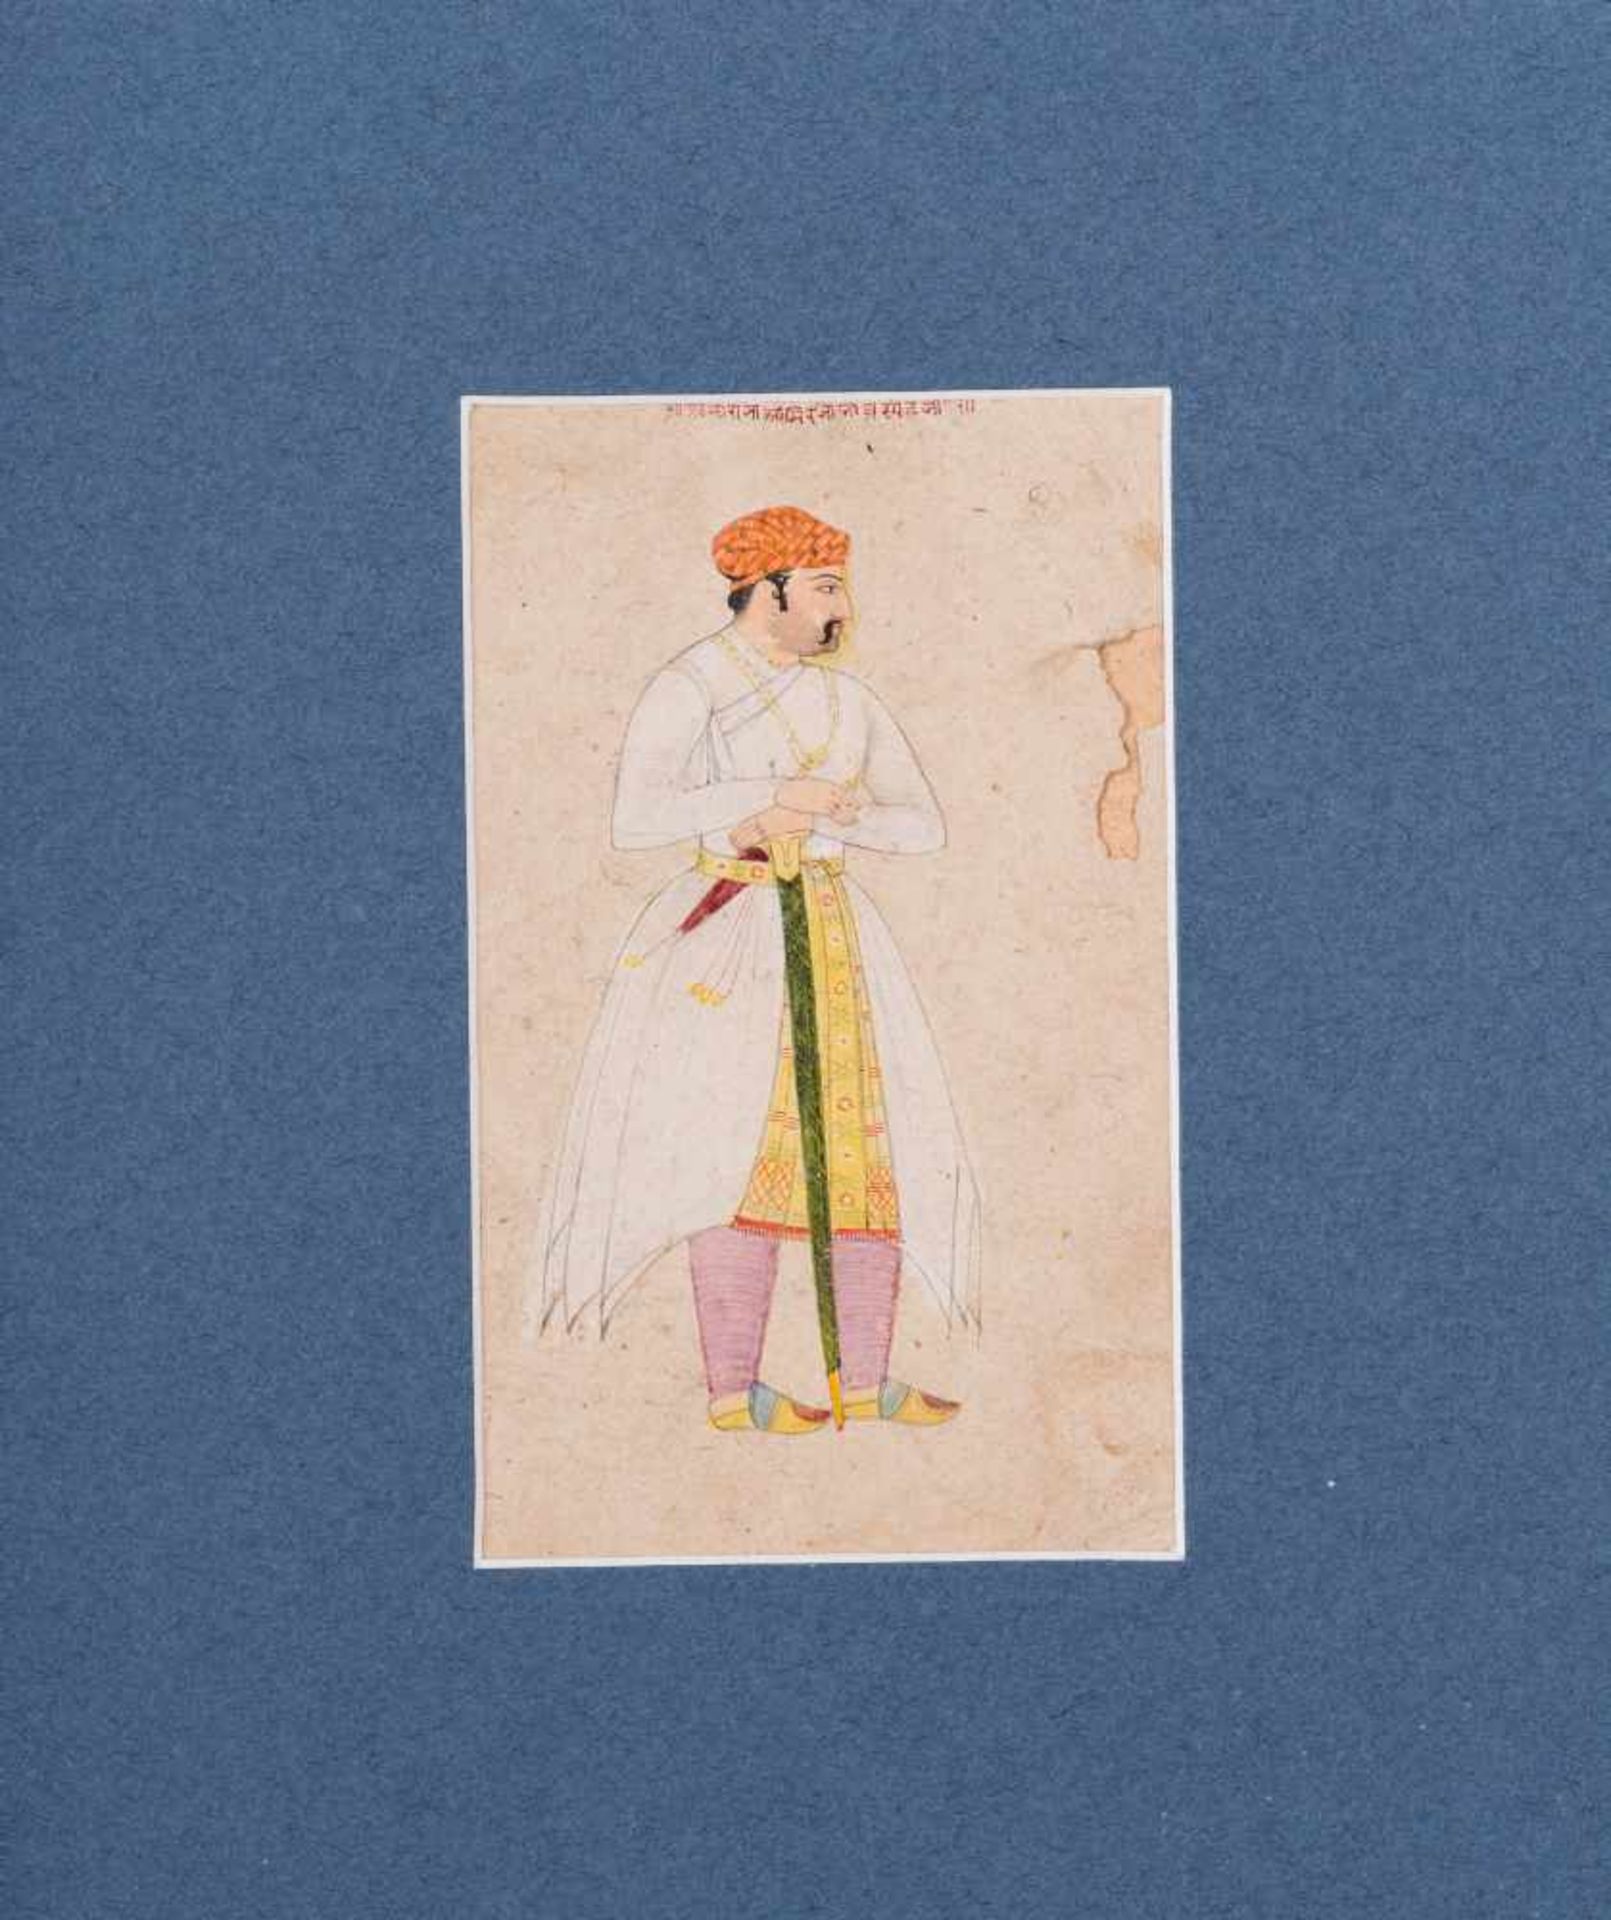 AN INDIAN MINIATURE PORTRAIT PAINTING - 19th CENTURYMiniature painting with colors on paperIndia, - Image 3 of 3